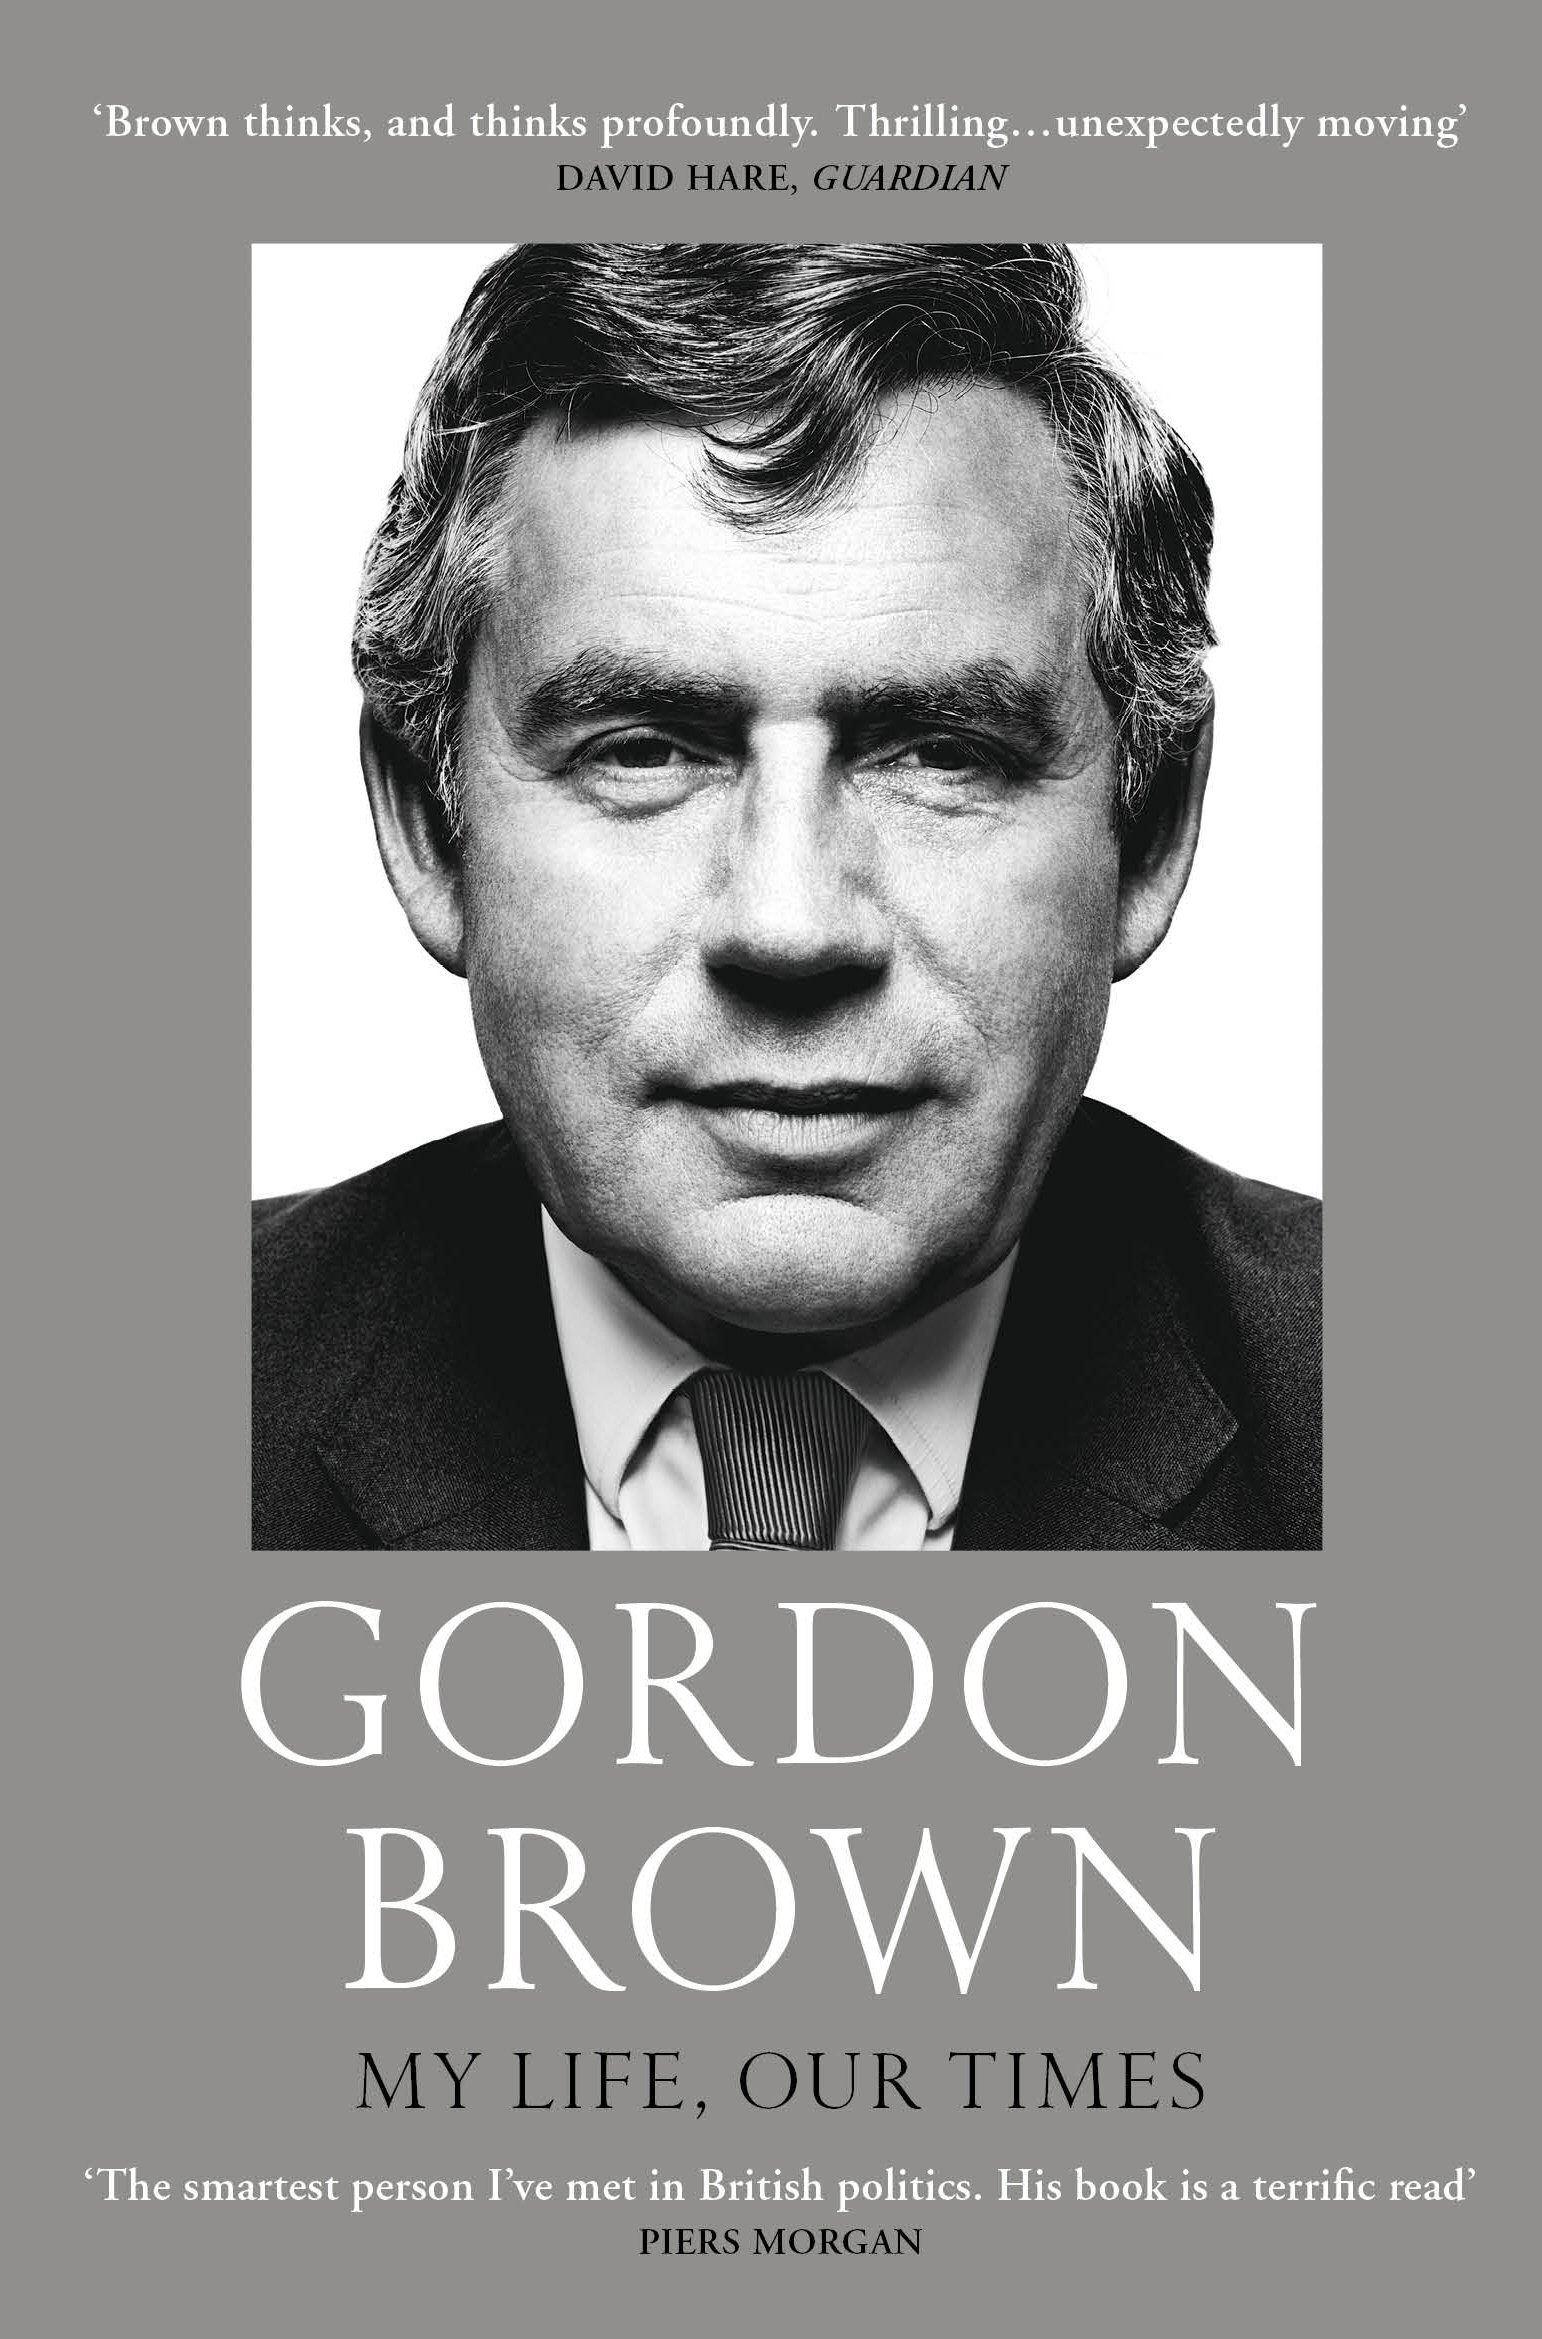 My Life, Our Times | Gordon Brown image4